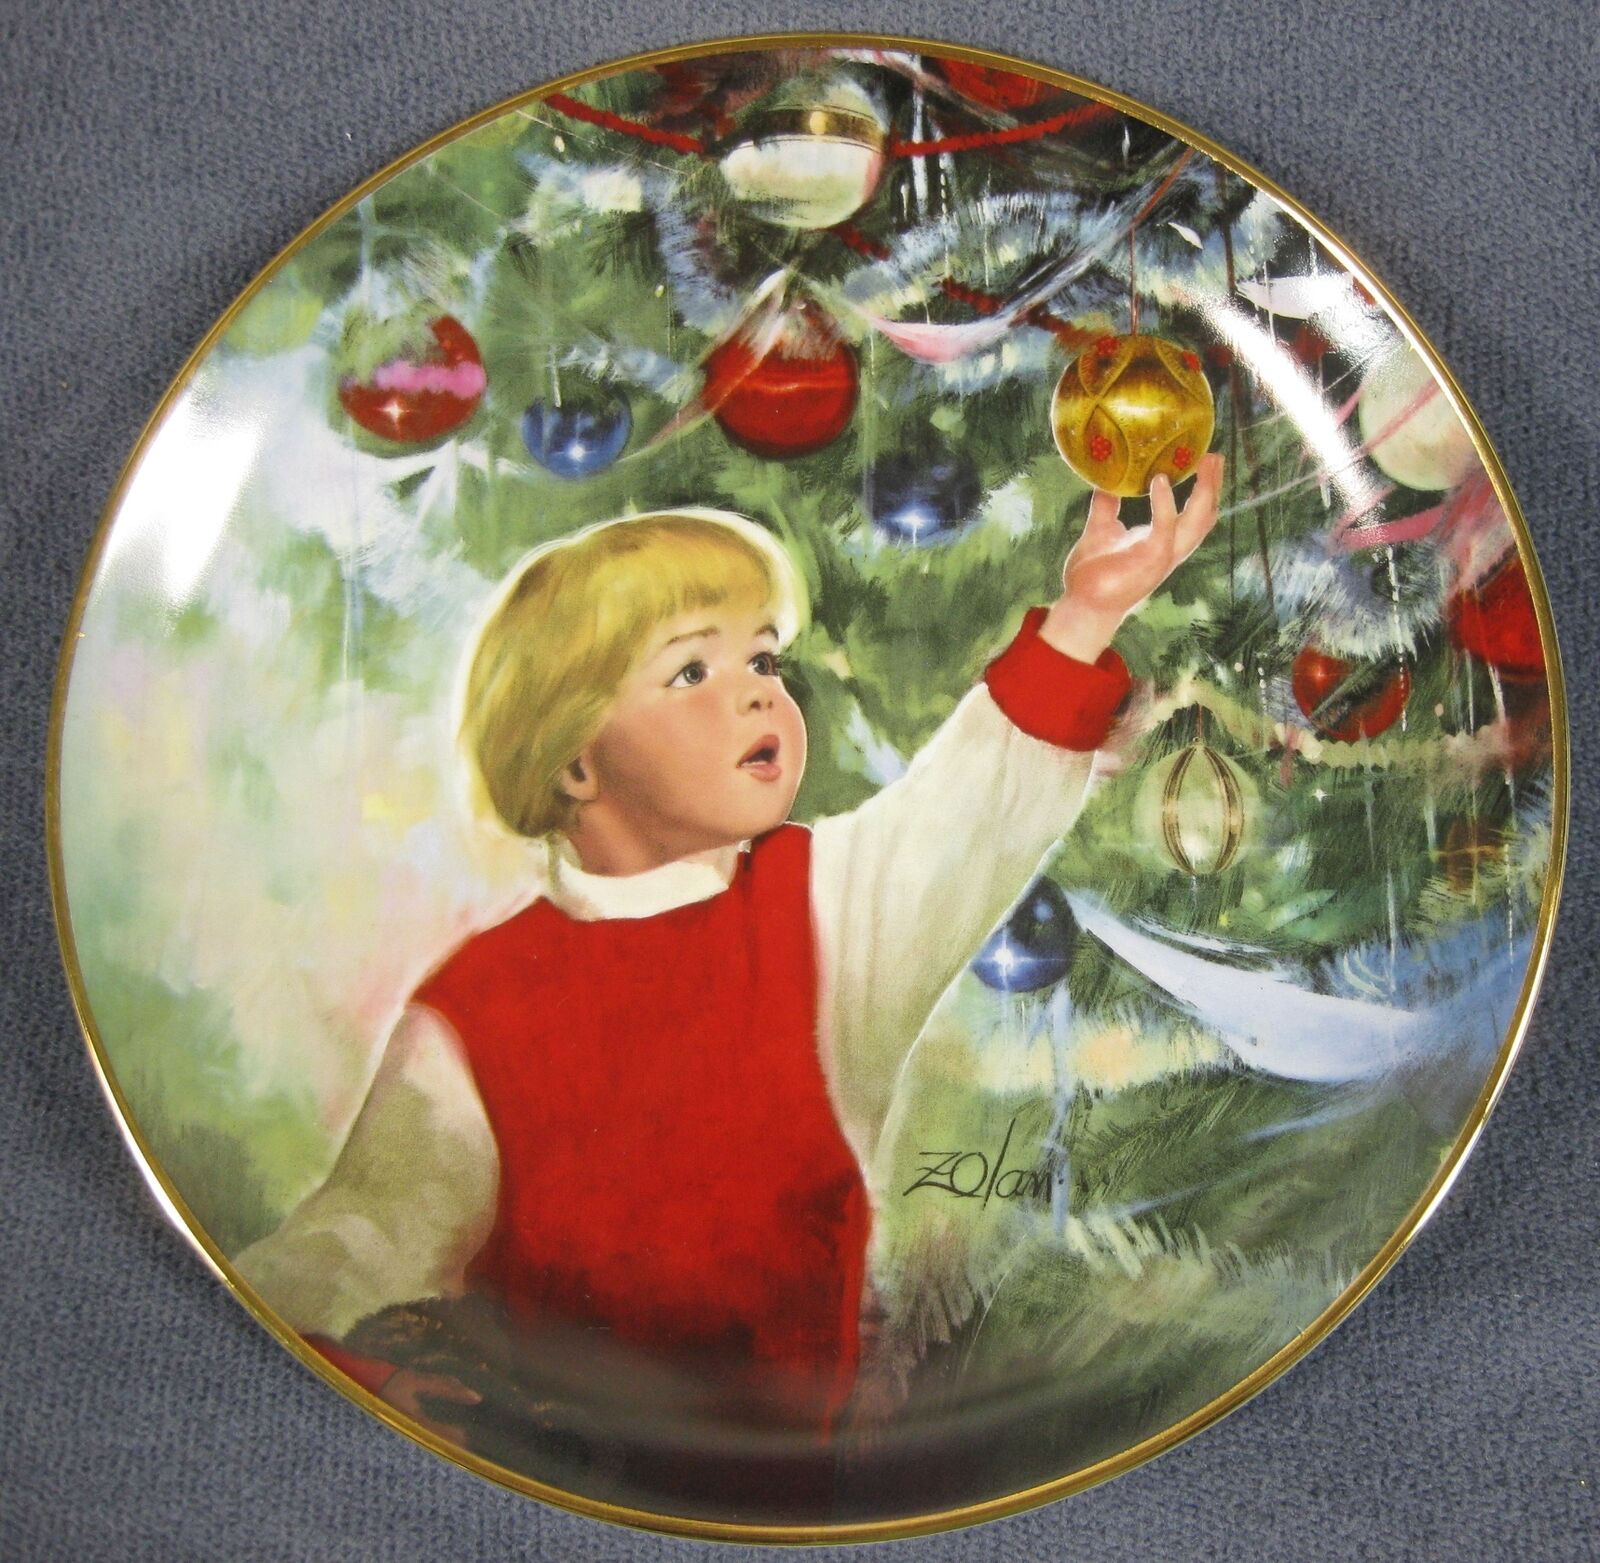 Erick\'s Delight Donald Zolan Wonders Of Youth Collectors Plate Pemberton & Oakes